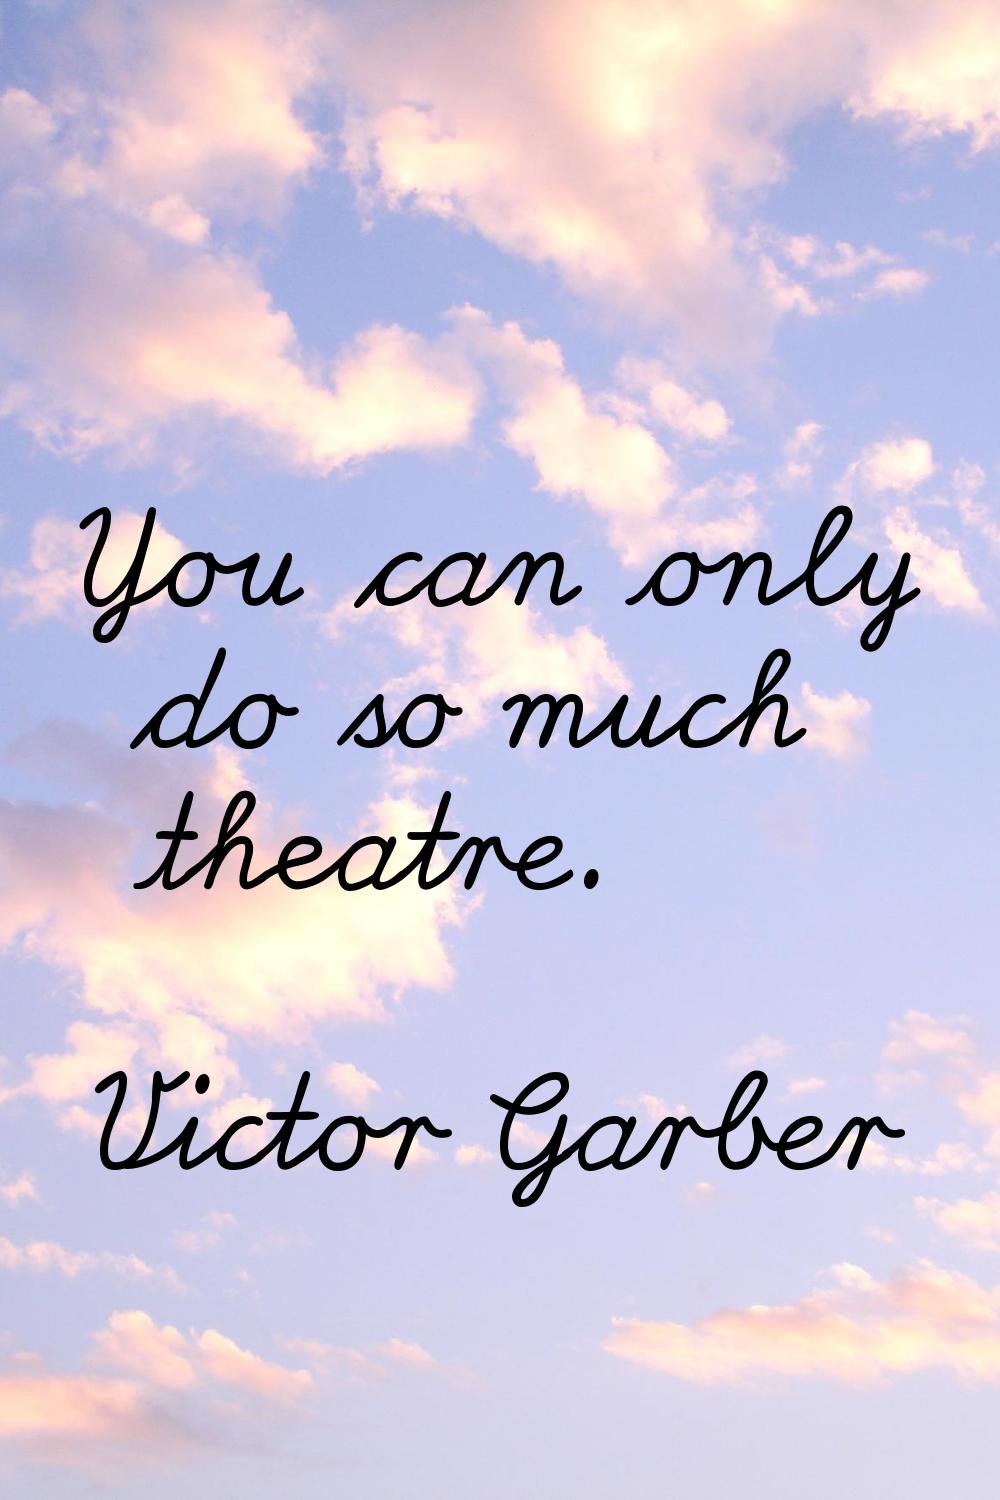 You can only do so much theatre.